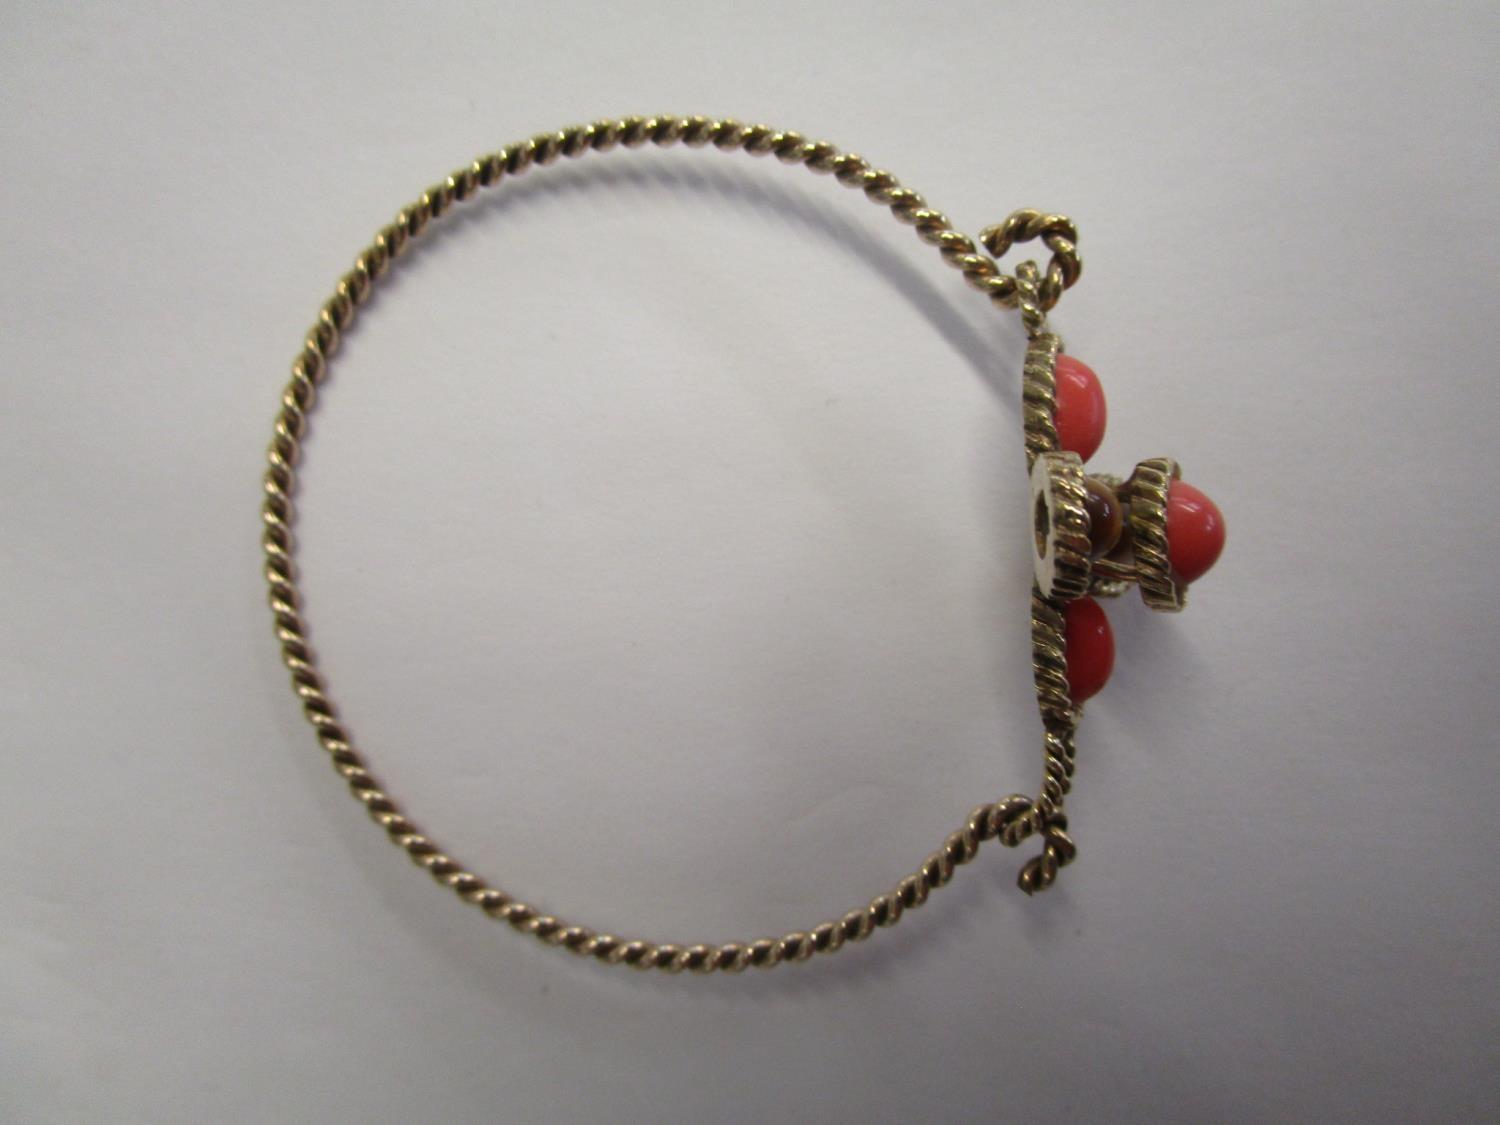 A 9ct yellow gold rope twist bracelet set with tigers eye and coral coloured stones in a cross - Image 2 of 2